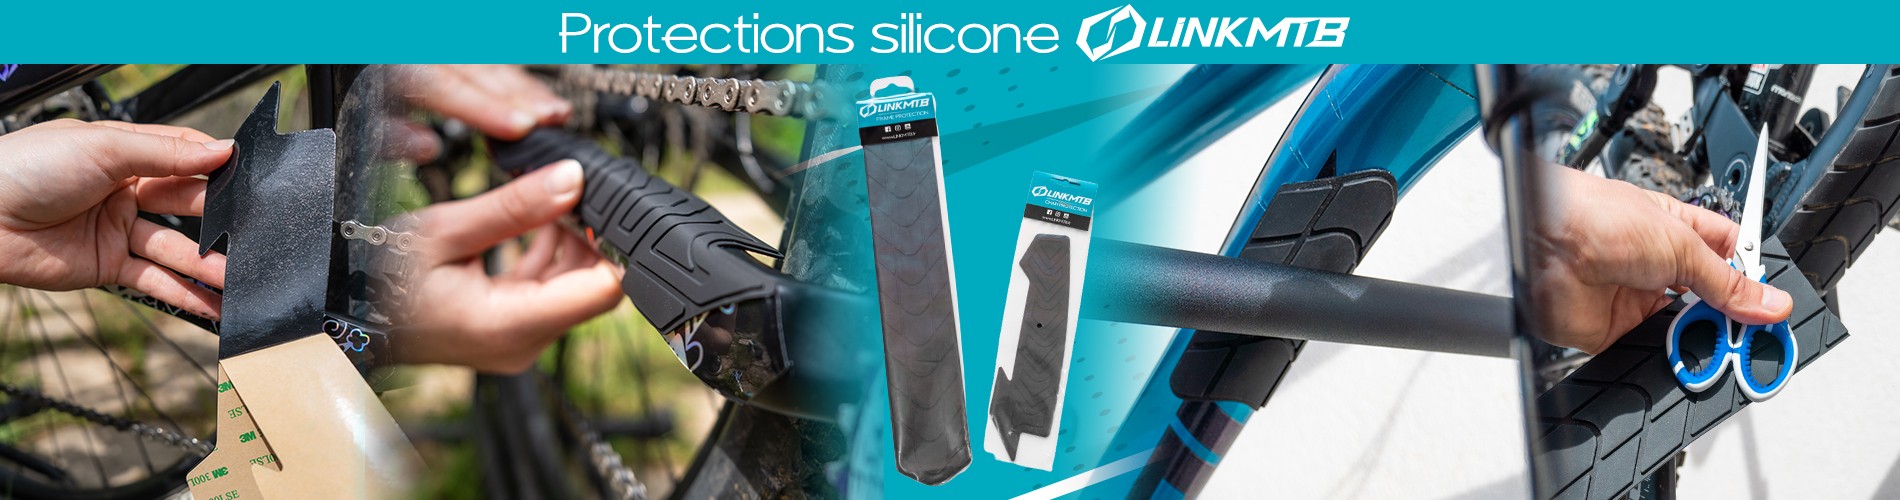 protection-silicone